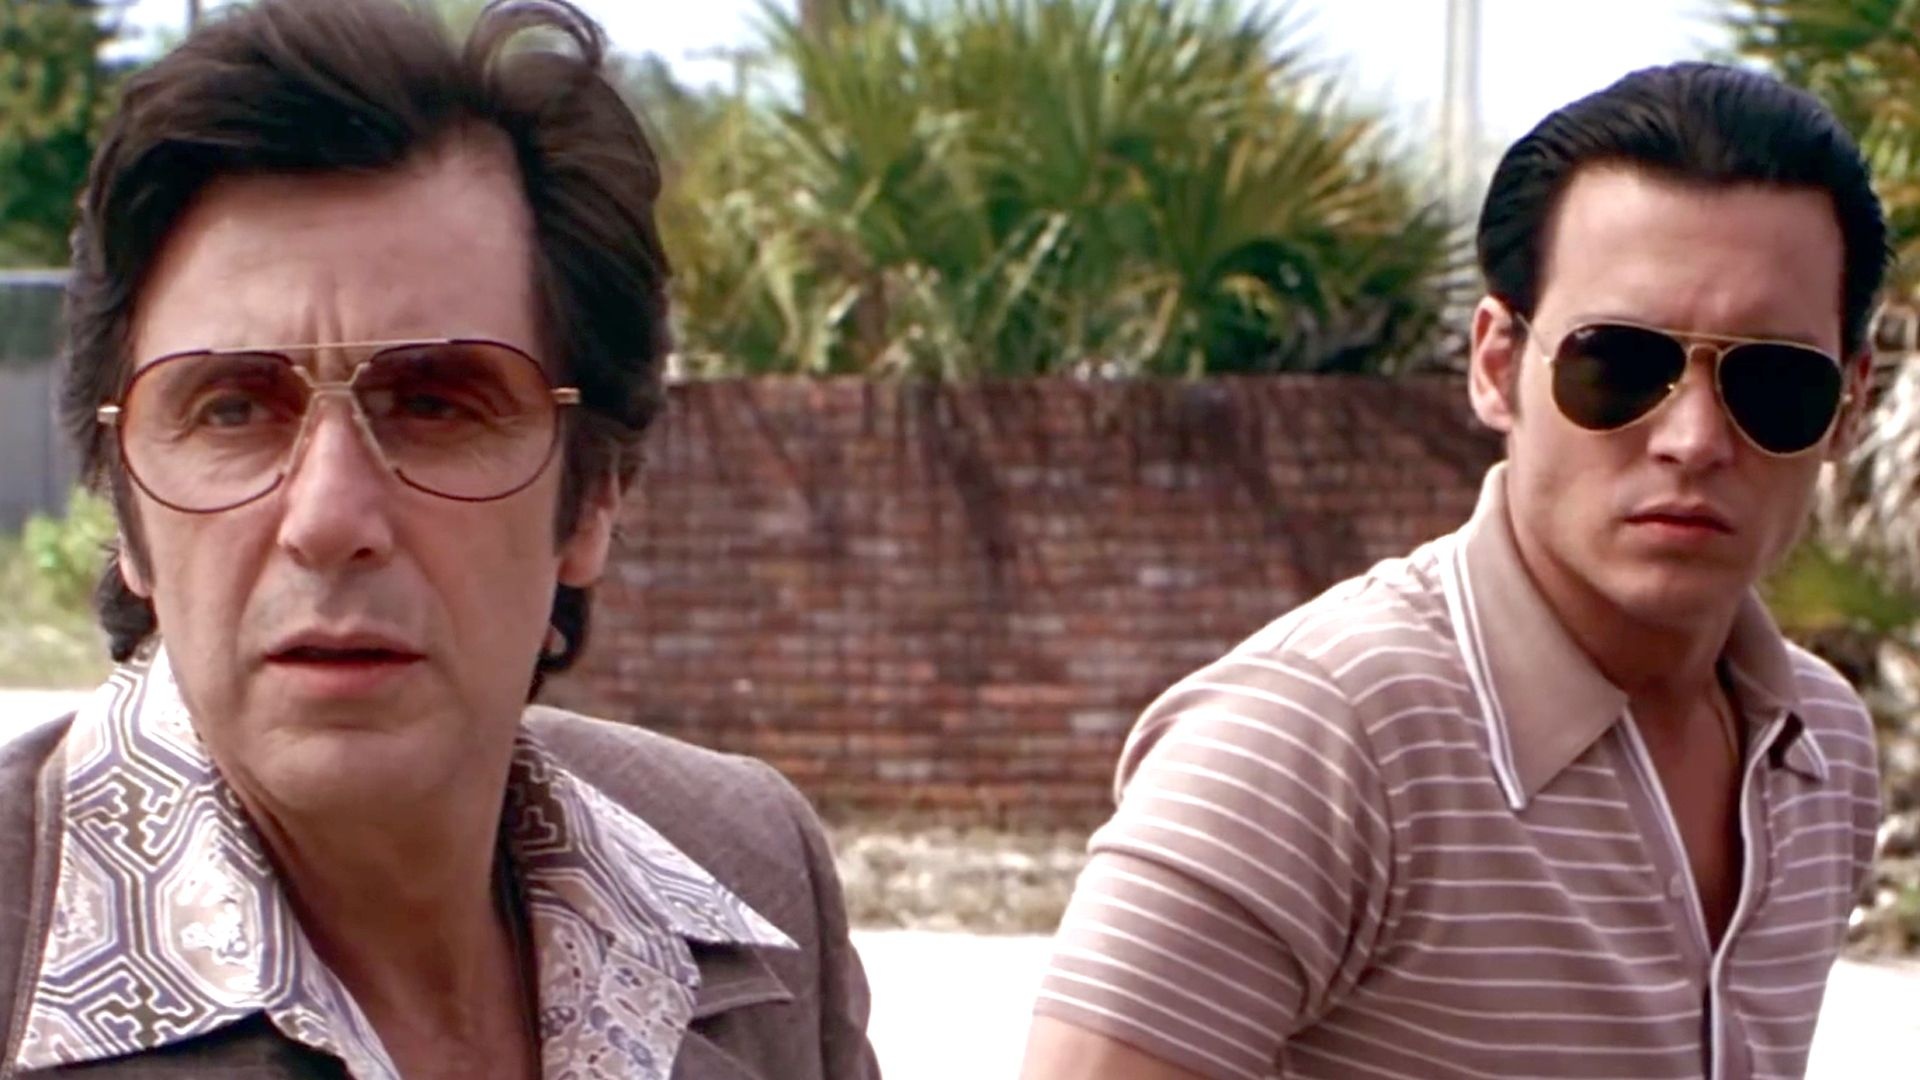 Donnie Brasco (Movies), Top Free Wallpapers, Backgrounds, 1920x1080 Full HD Desktop